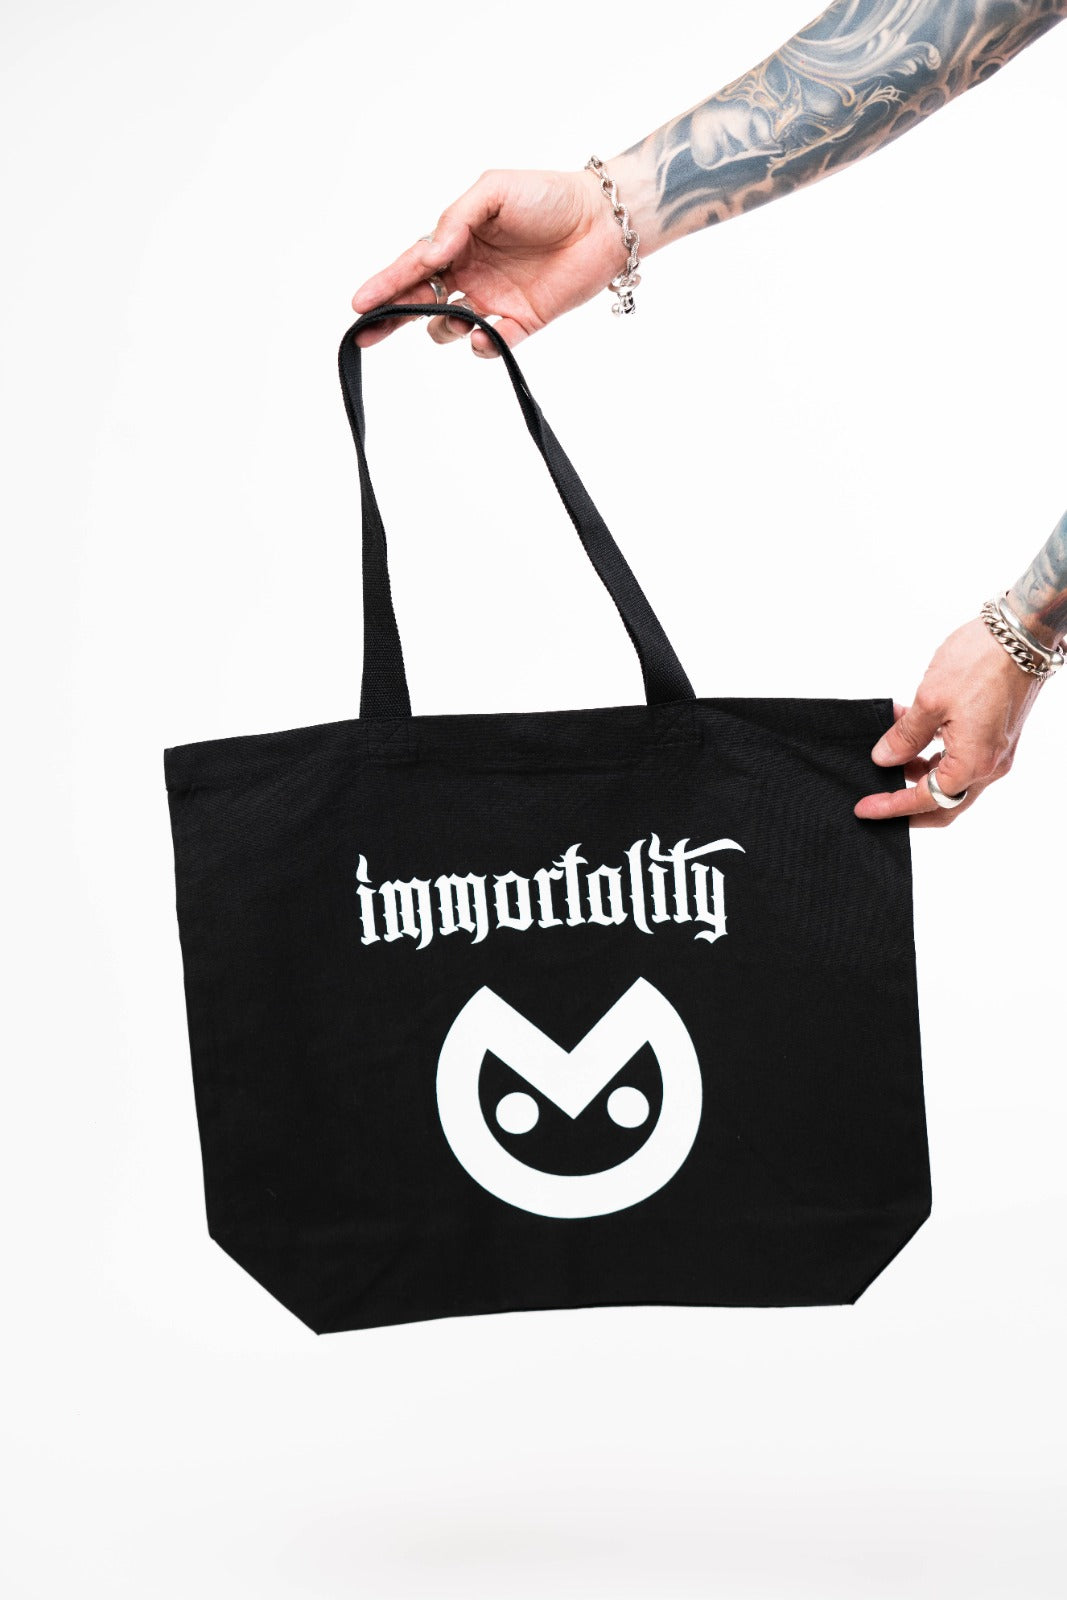 Immortality Totes, LAB309 totes